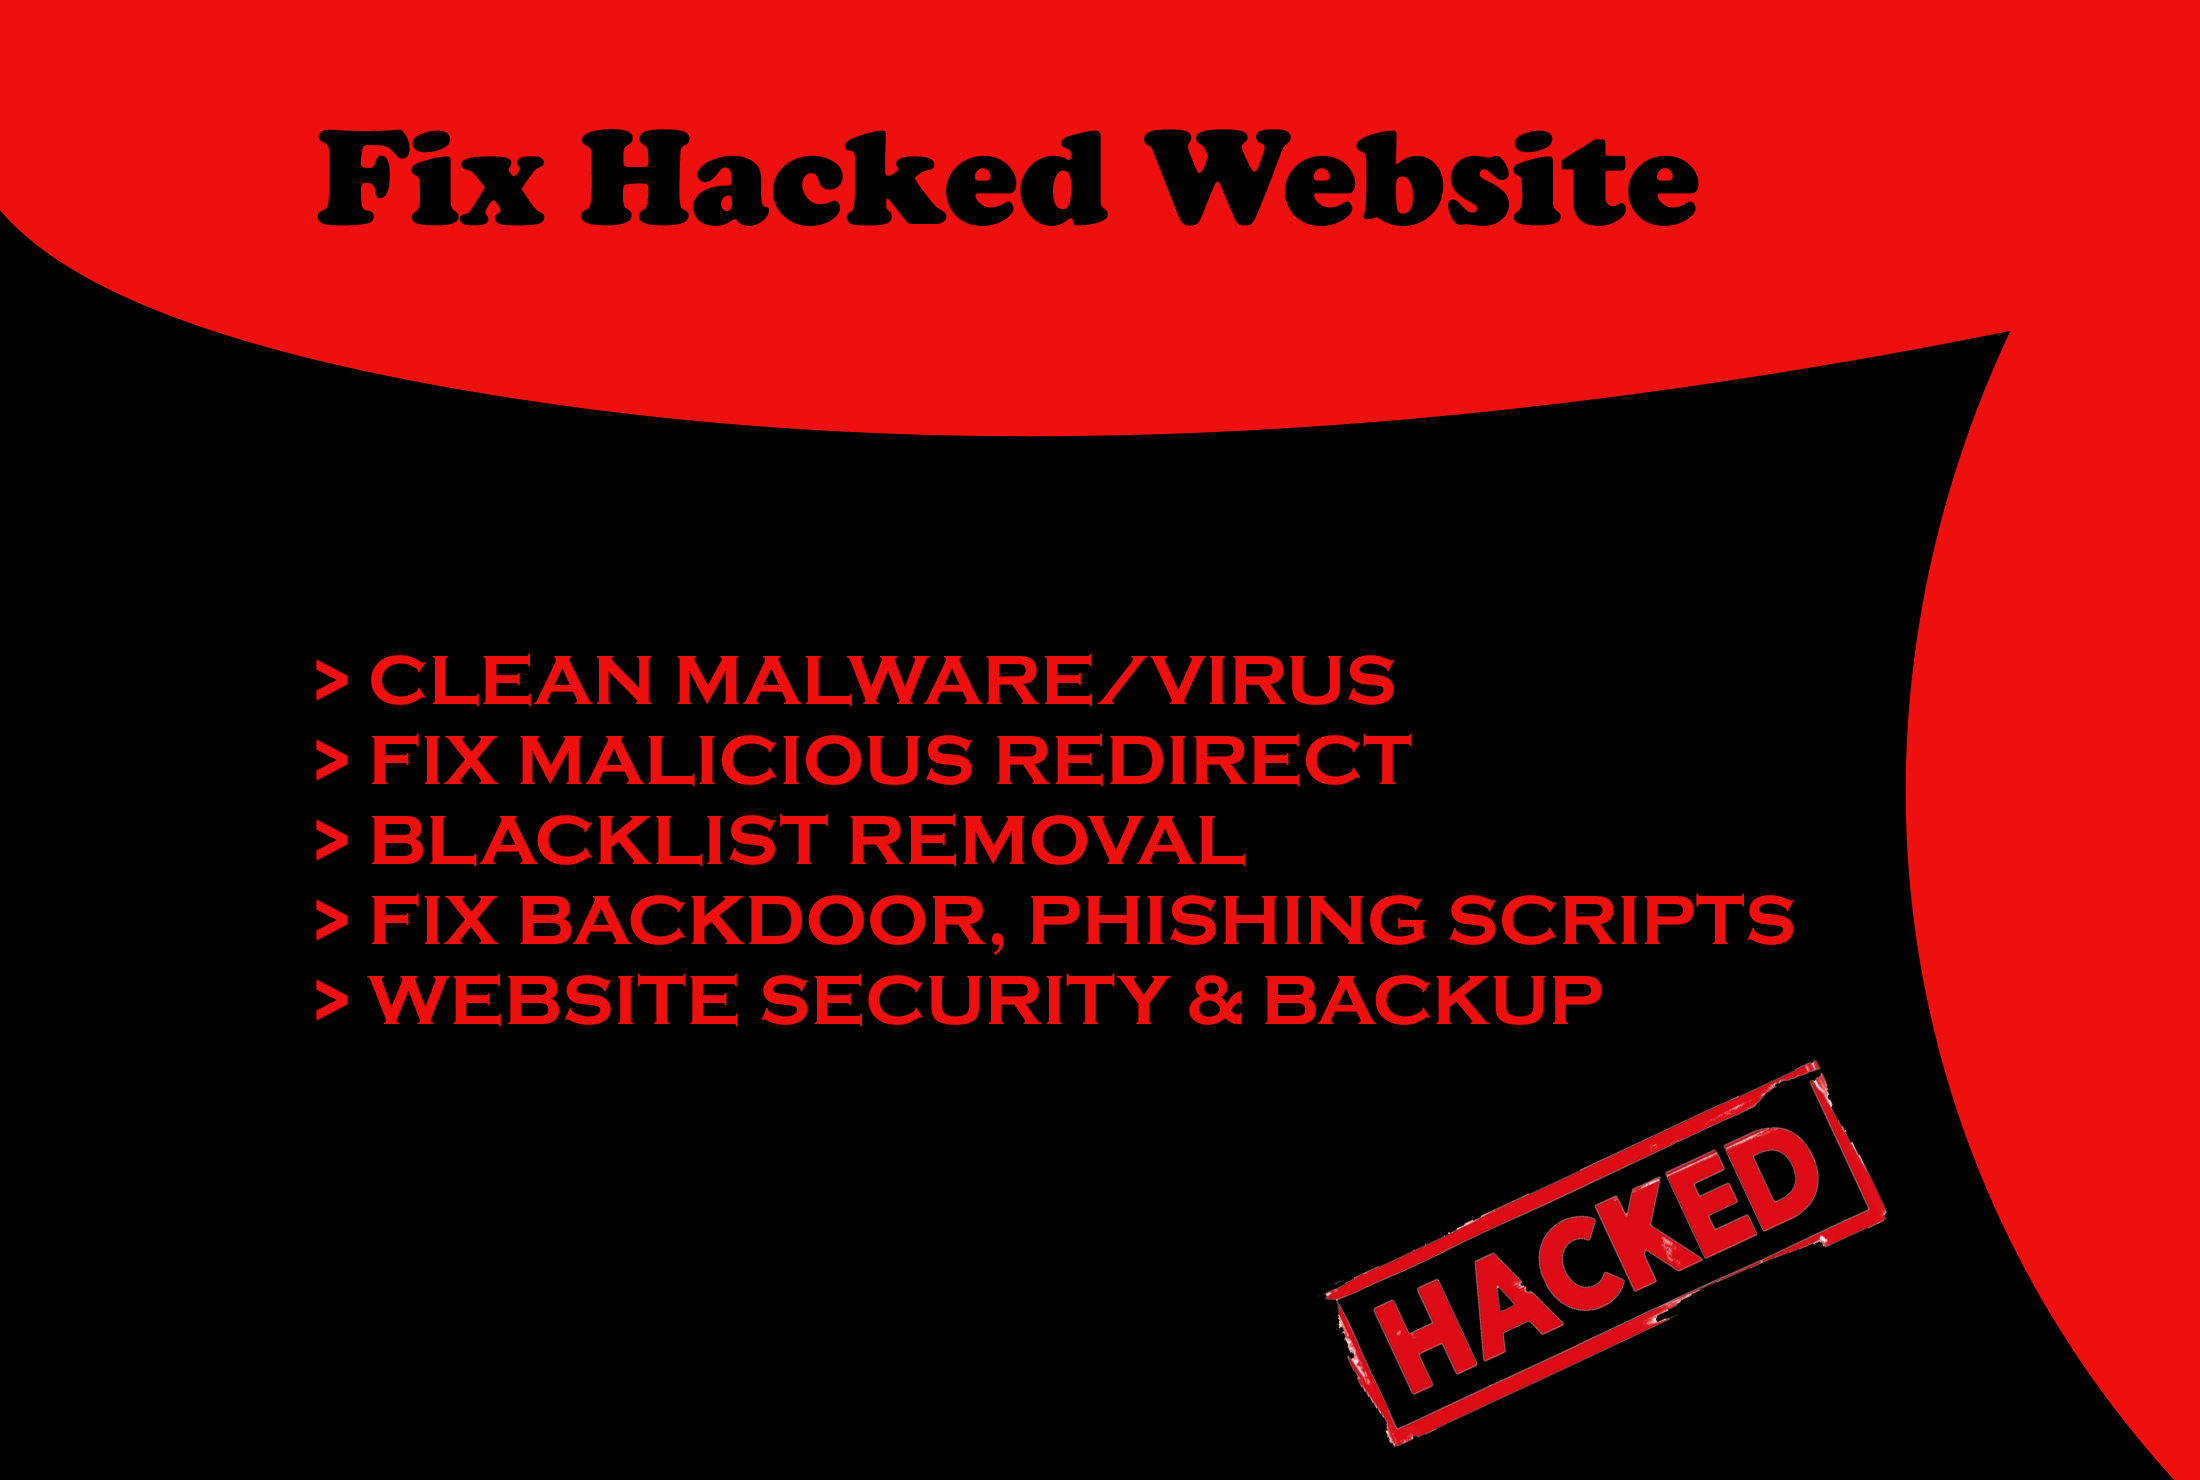 Remove malware and fix hacked websites and security